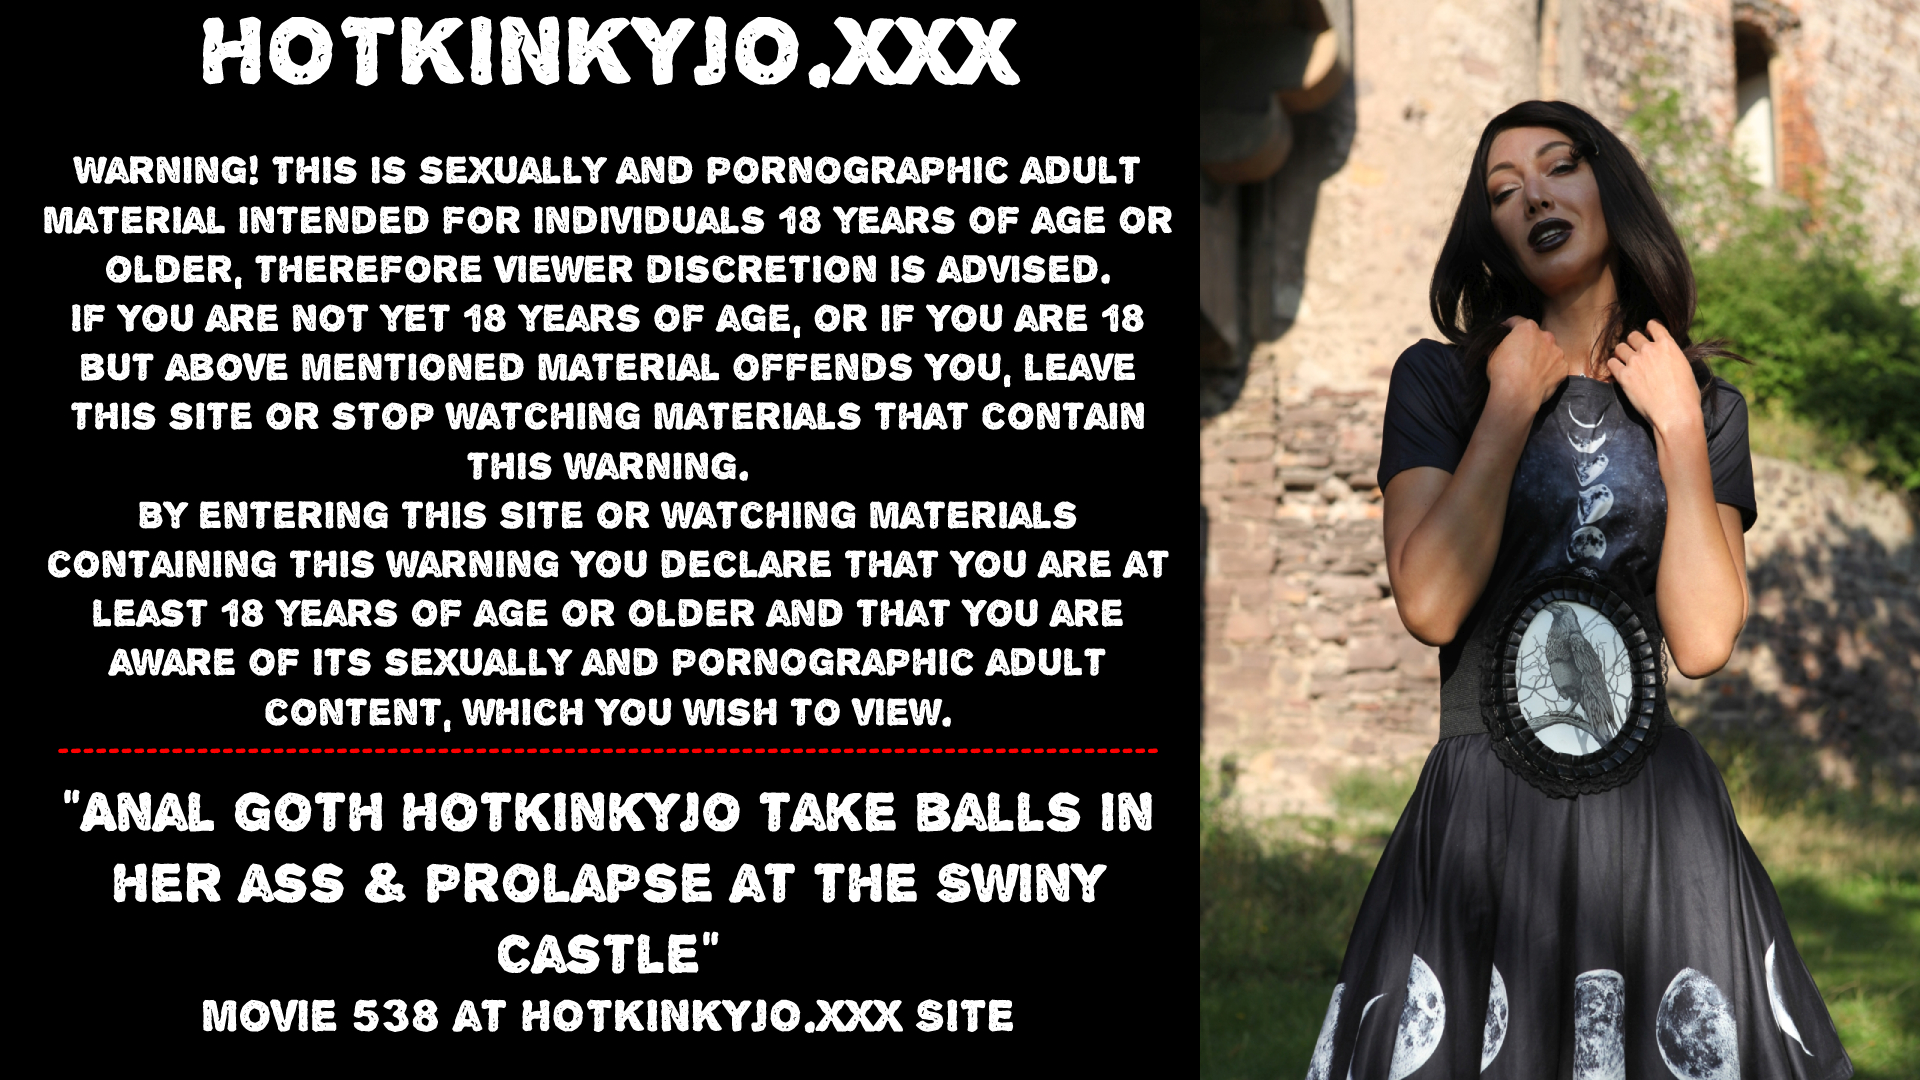 Anal goth Hotkinkyjo take balls in her ass & prolapse